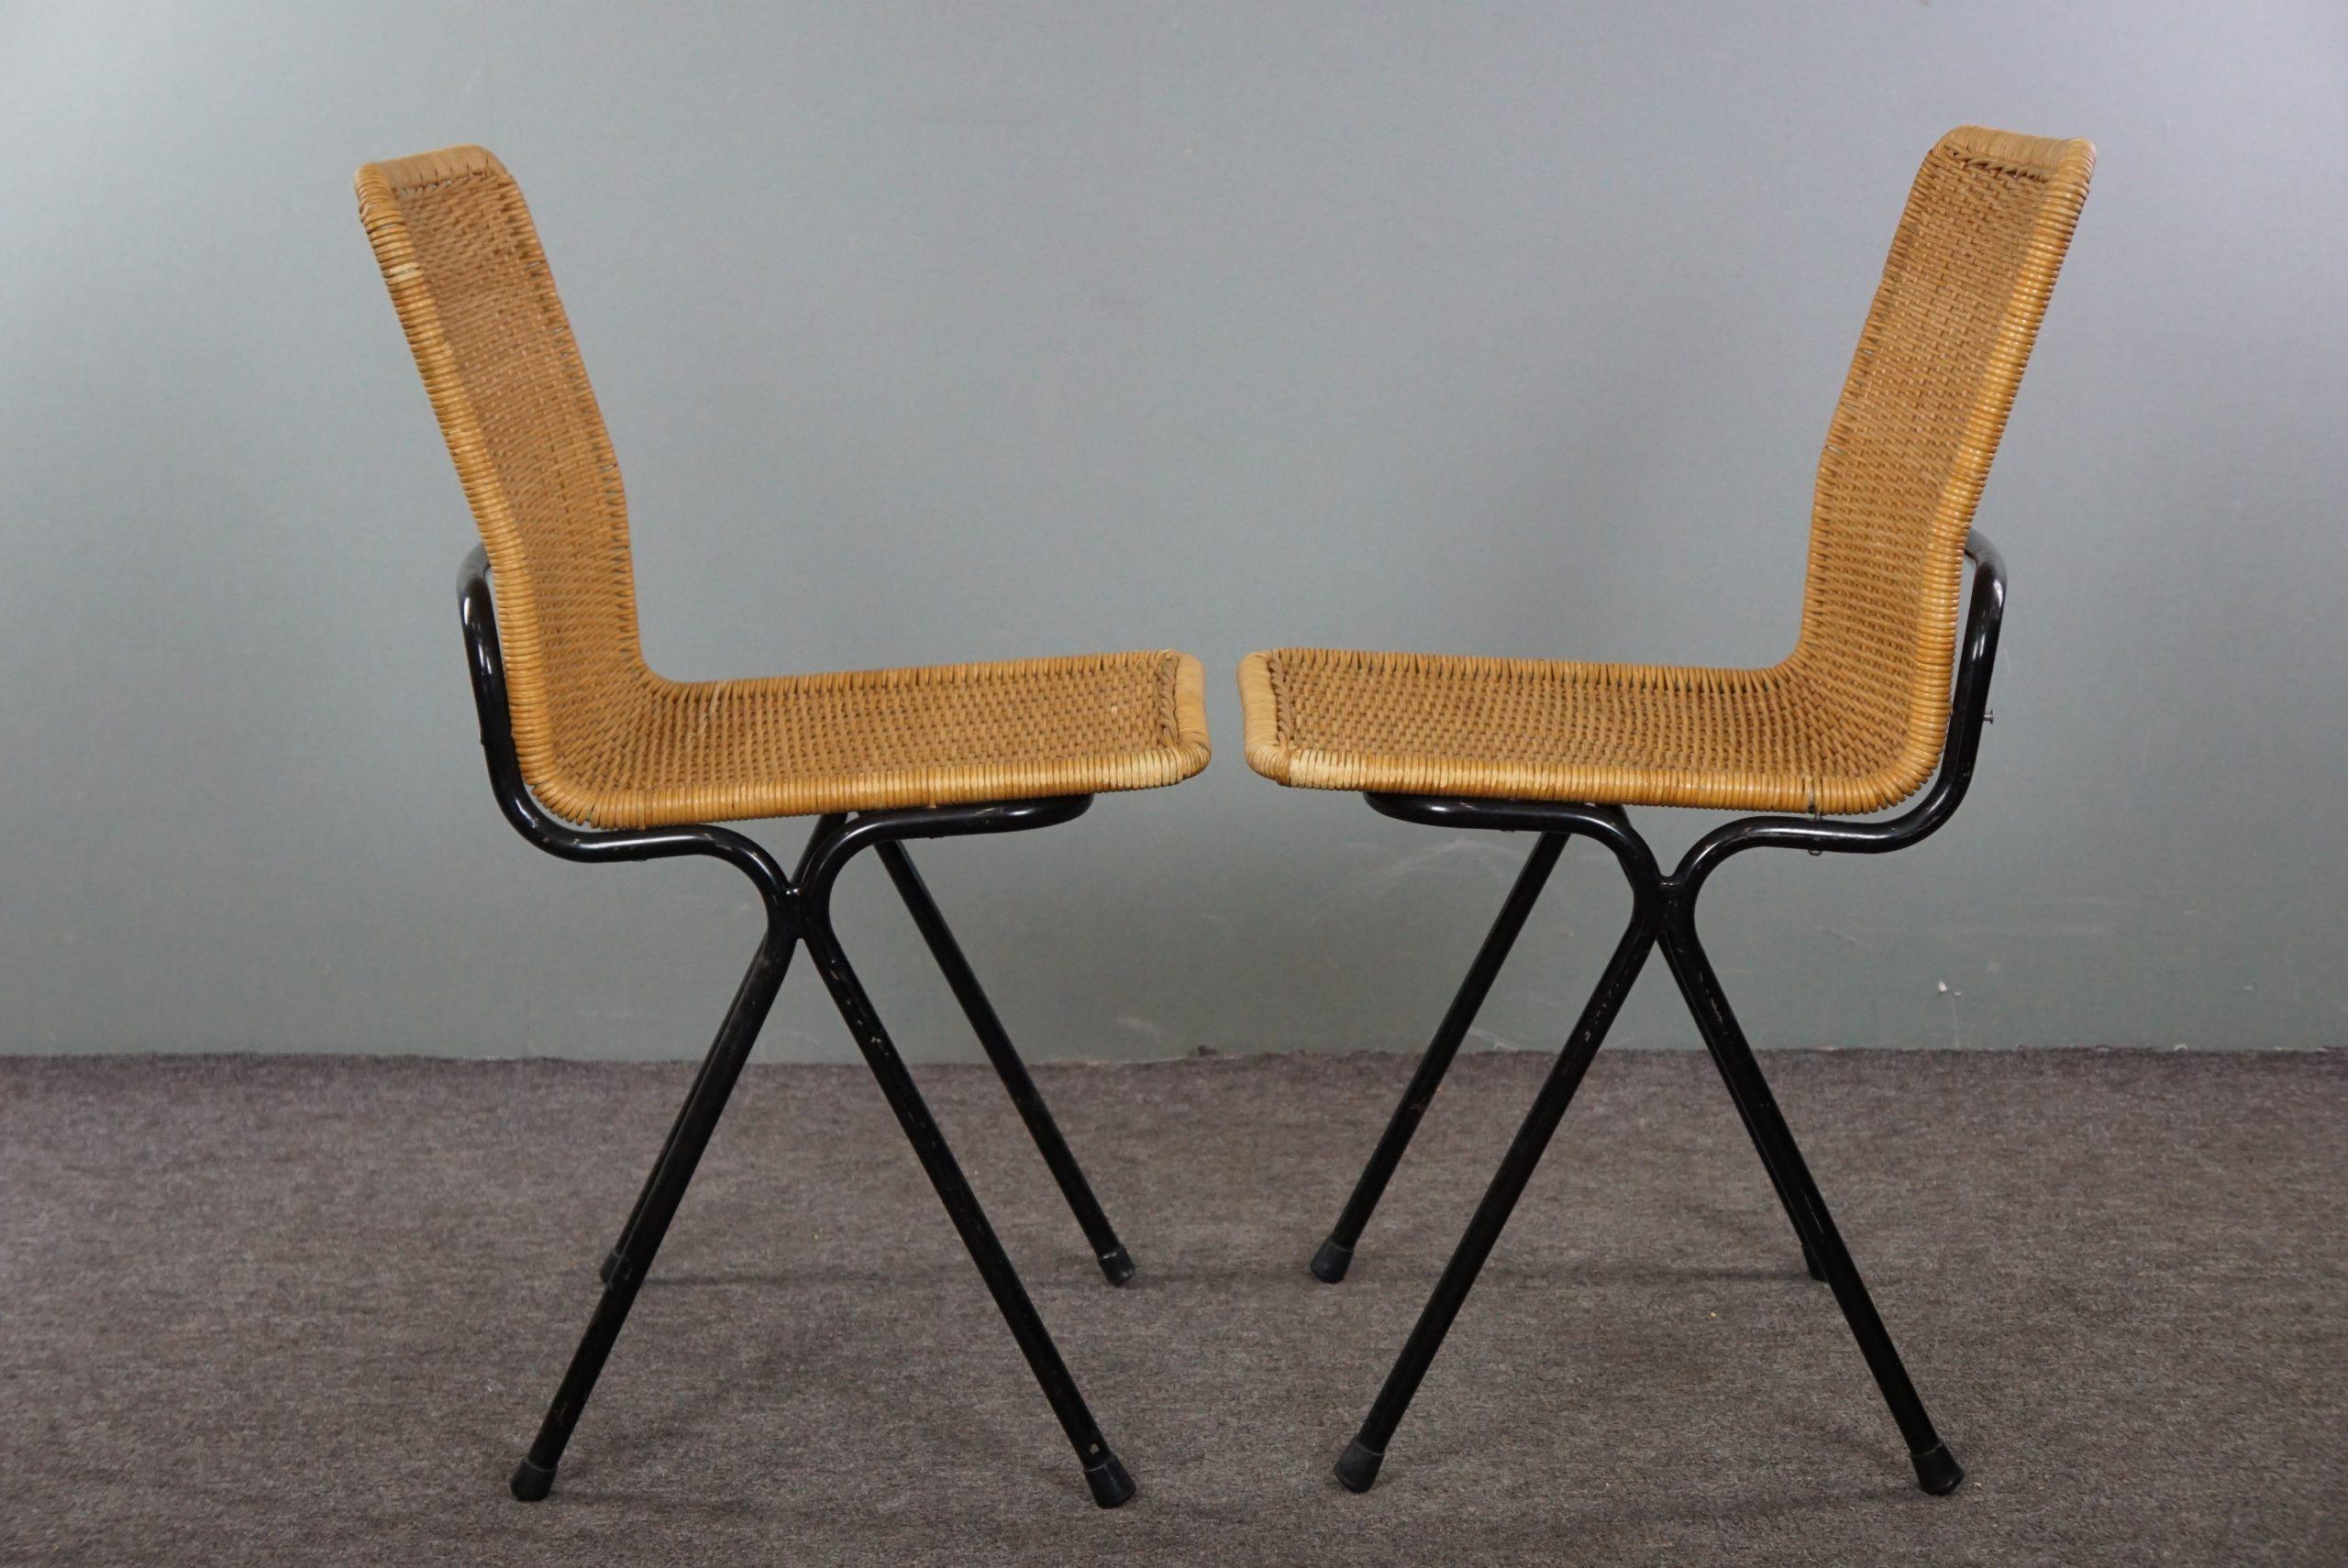 Offered ByThijs, this set of two vintage rattan design chairs, Dirk van Sliedrecht, 1960s. This lovely set is in a good used condition and looks great in almost any interior style. These chairs are also nice to combine with other dining chairs at